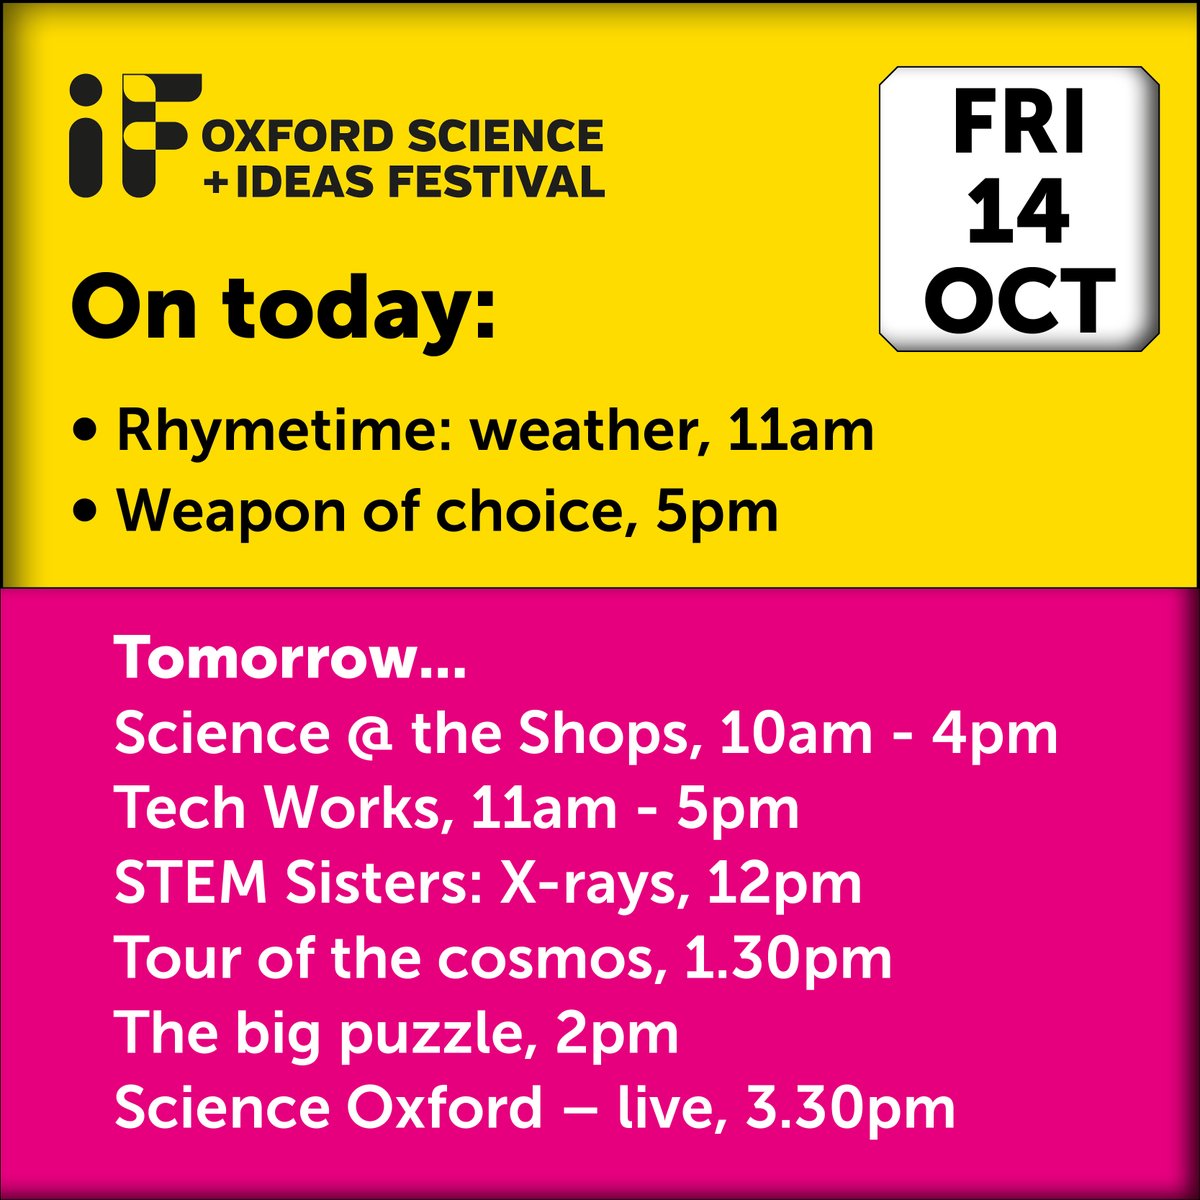 On today and tomorrow #IFOx2022 if-oxford.com @RotwangsRobot @OxfordPlayhouse @Oxonlibraries @oxford_park @TemplarsSquare @hmdtmusic @unboxed2022 @scienceoxford @TheDroneRules @UKAEAofficial @ElementSix_ @ndorms @NDSurgicalSci @Immunocore @oxengsci @arc_oxtv